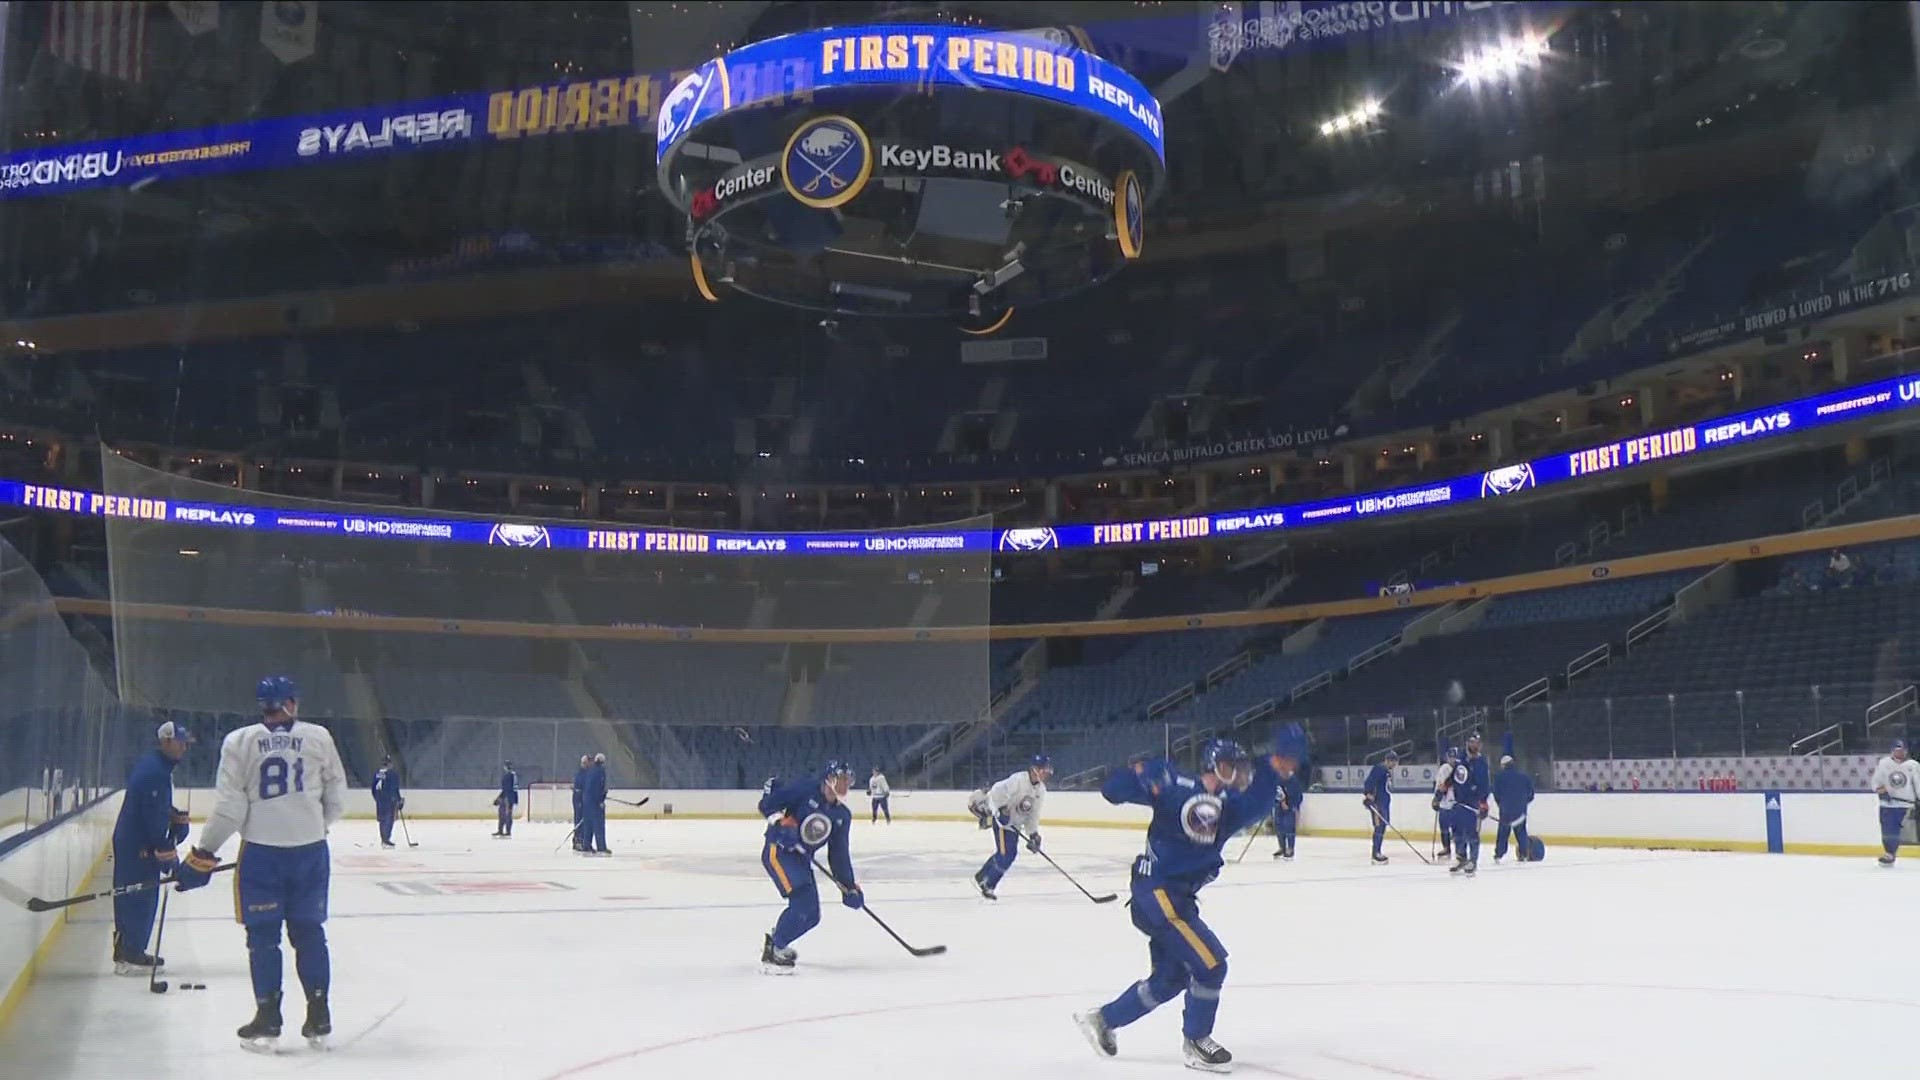 The Sabres are gearing up for the regular season that starts on October 12th